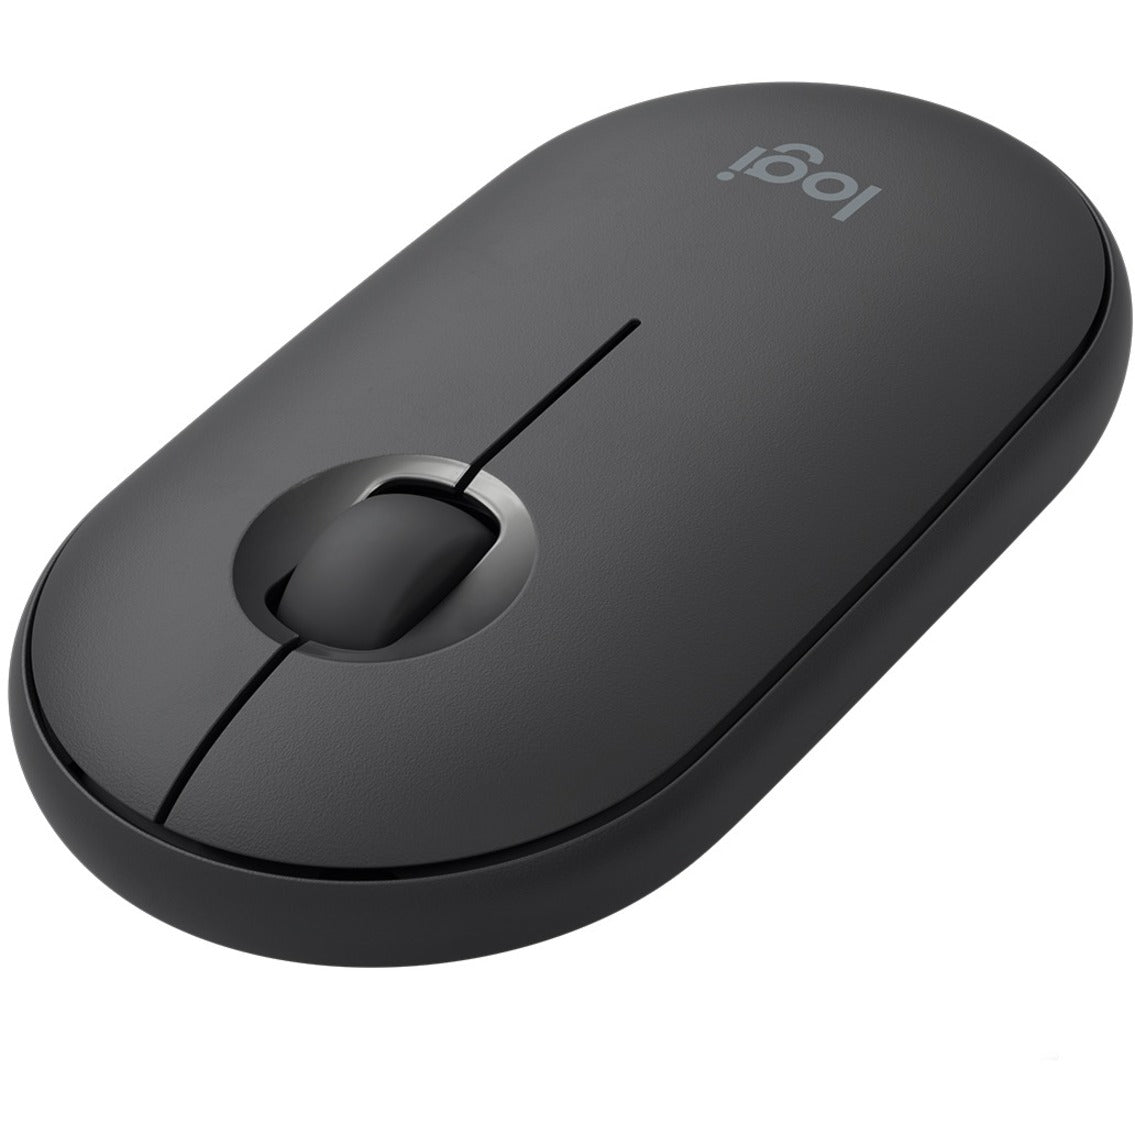 Logitech Pebble i345 Mouse - Wireless Bluetooth Mouse for iPad [Discontinued]